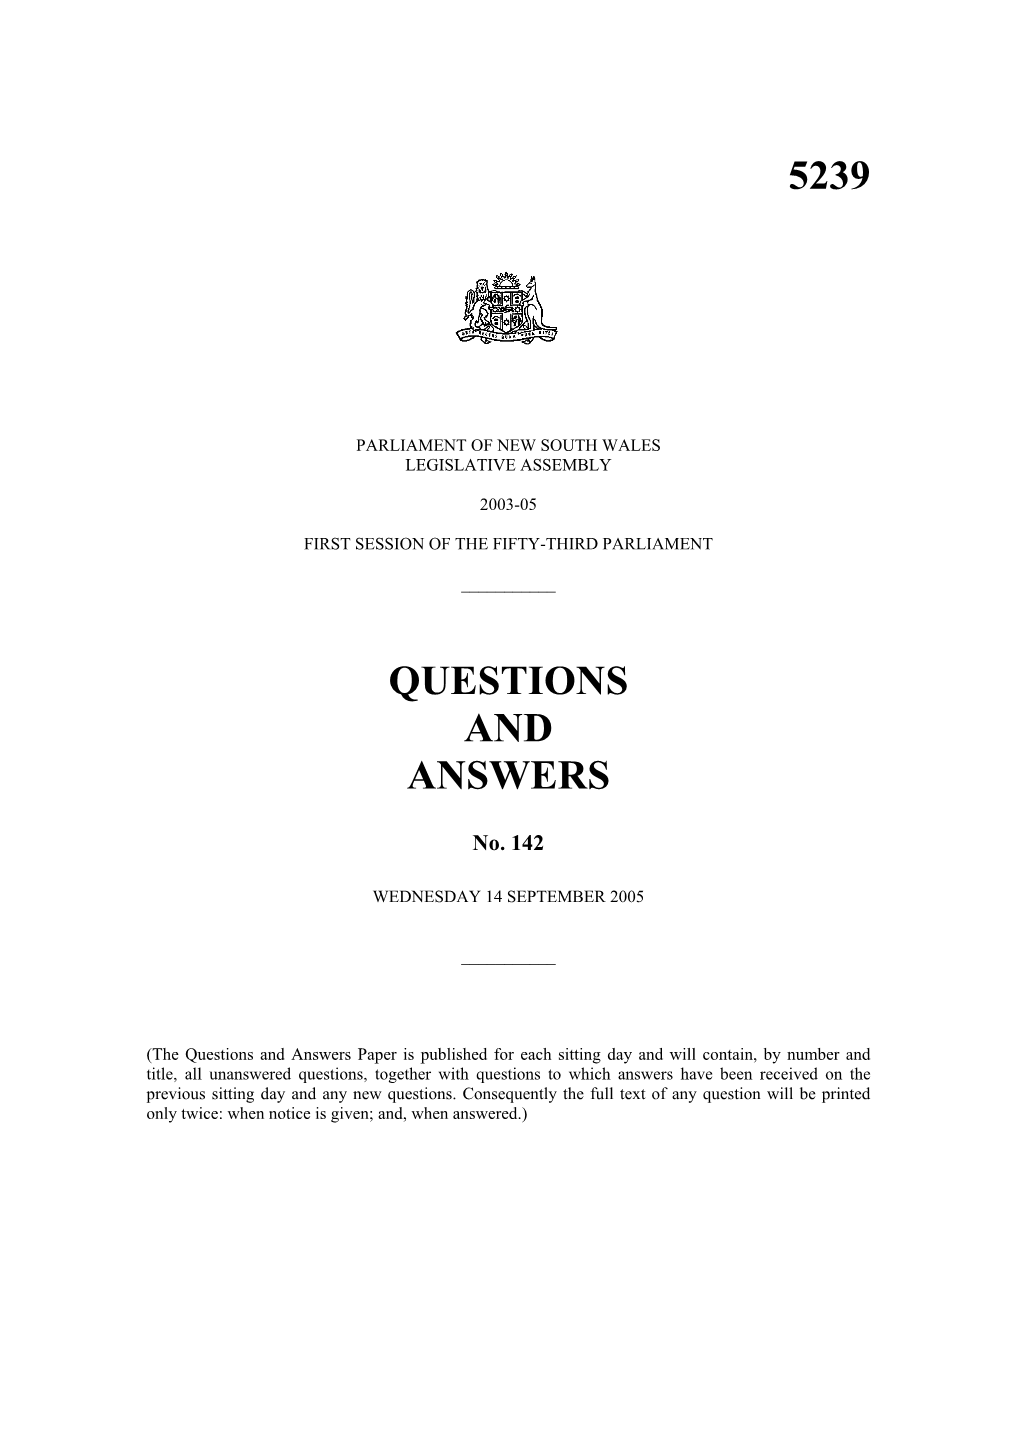 5239 Questions and Answers